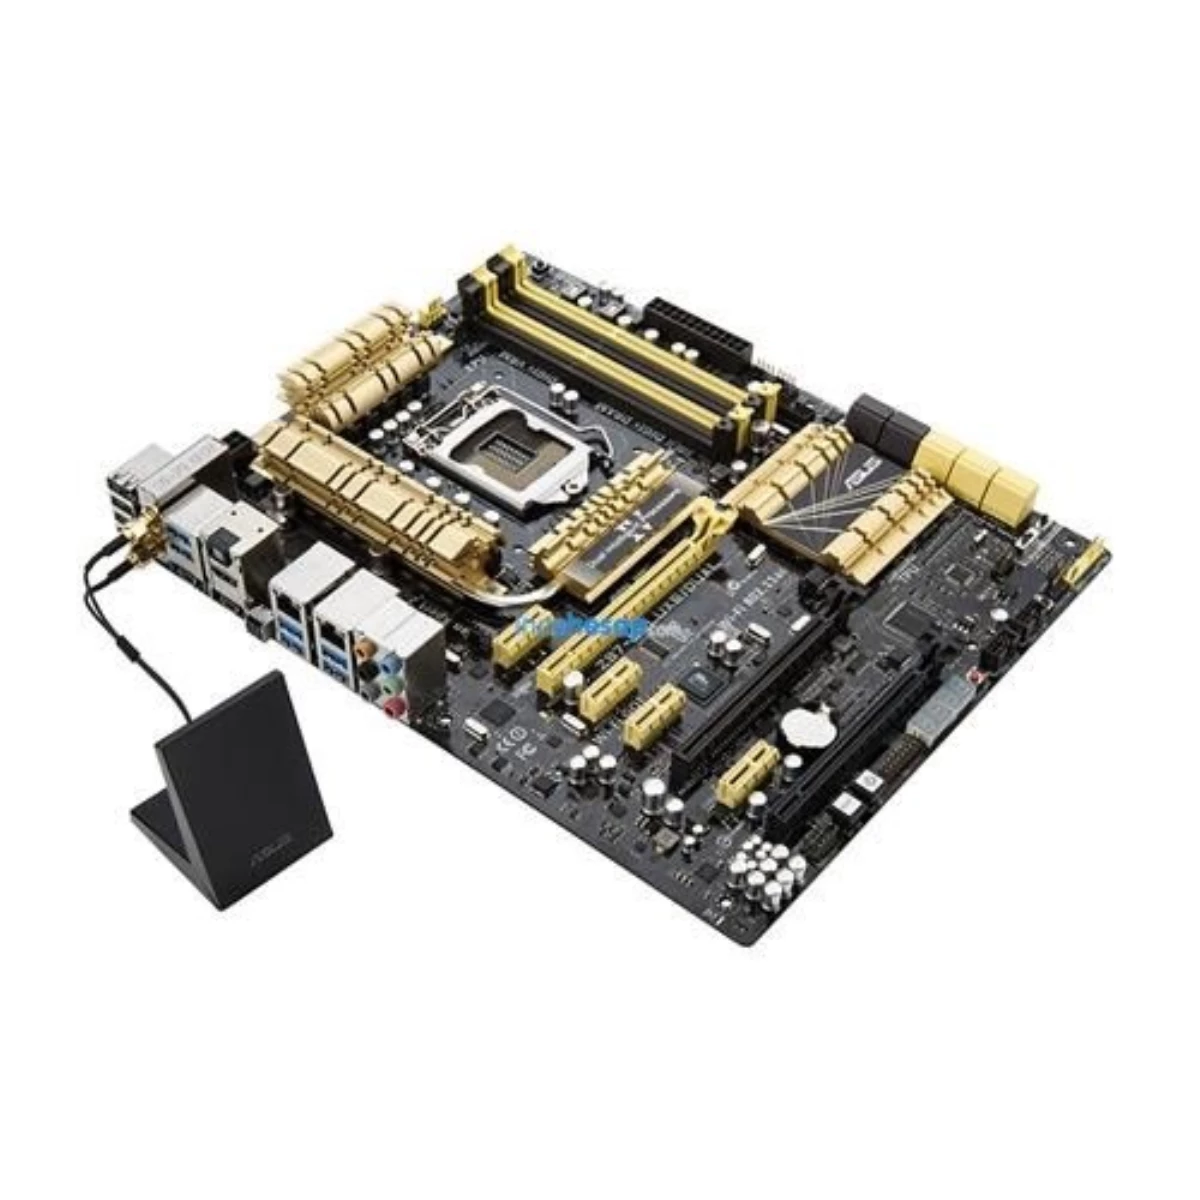 Asus Deluxe/dual Z87 Intel 1150pin Anakart